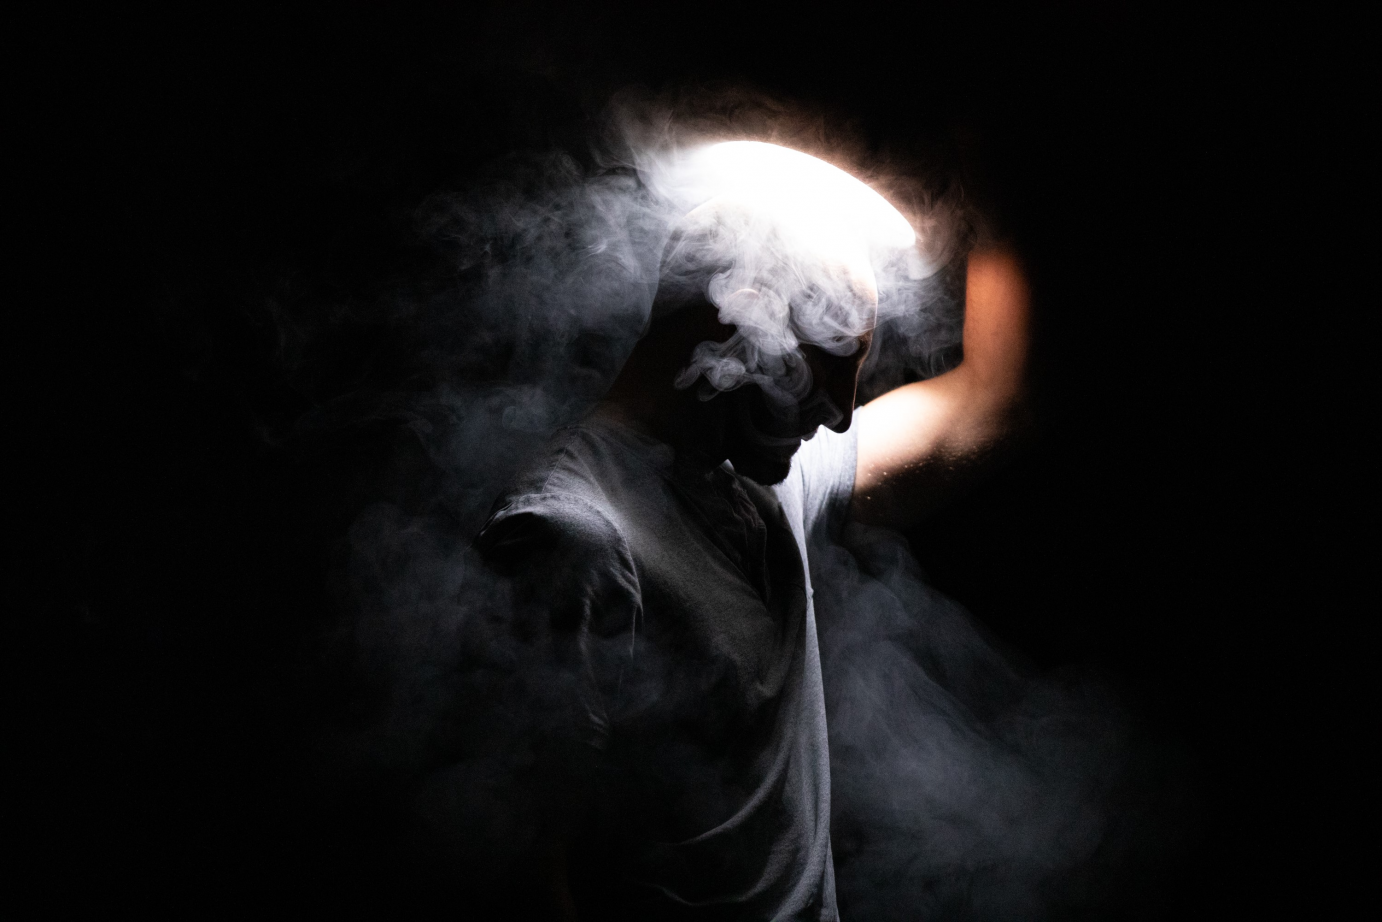 A man stands in profile, holding a light over his head as fog emits.